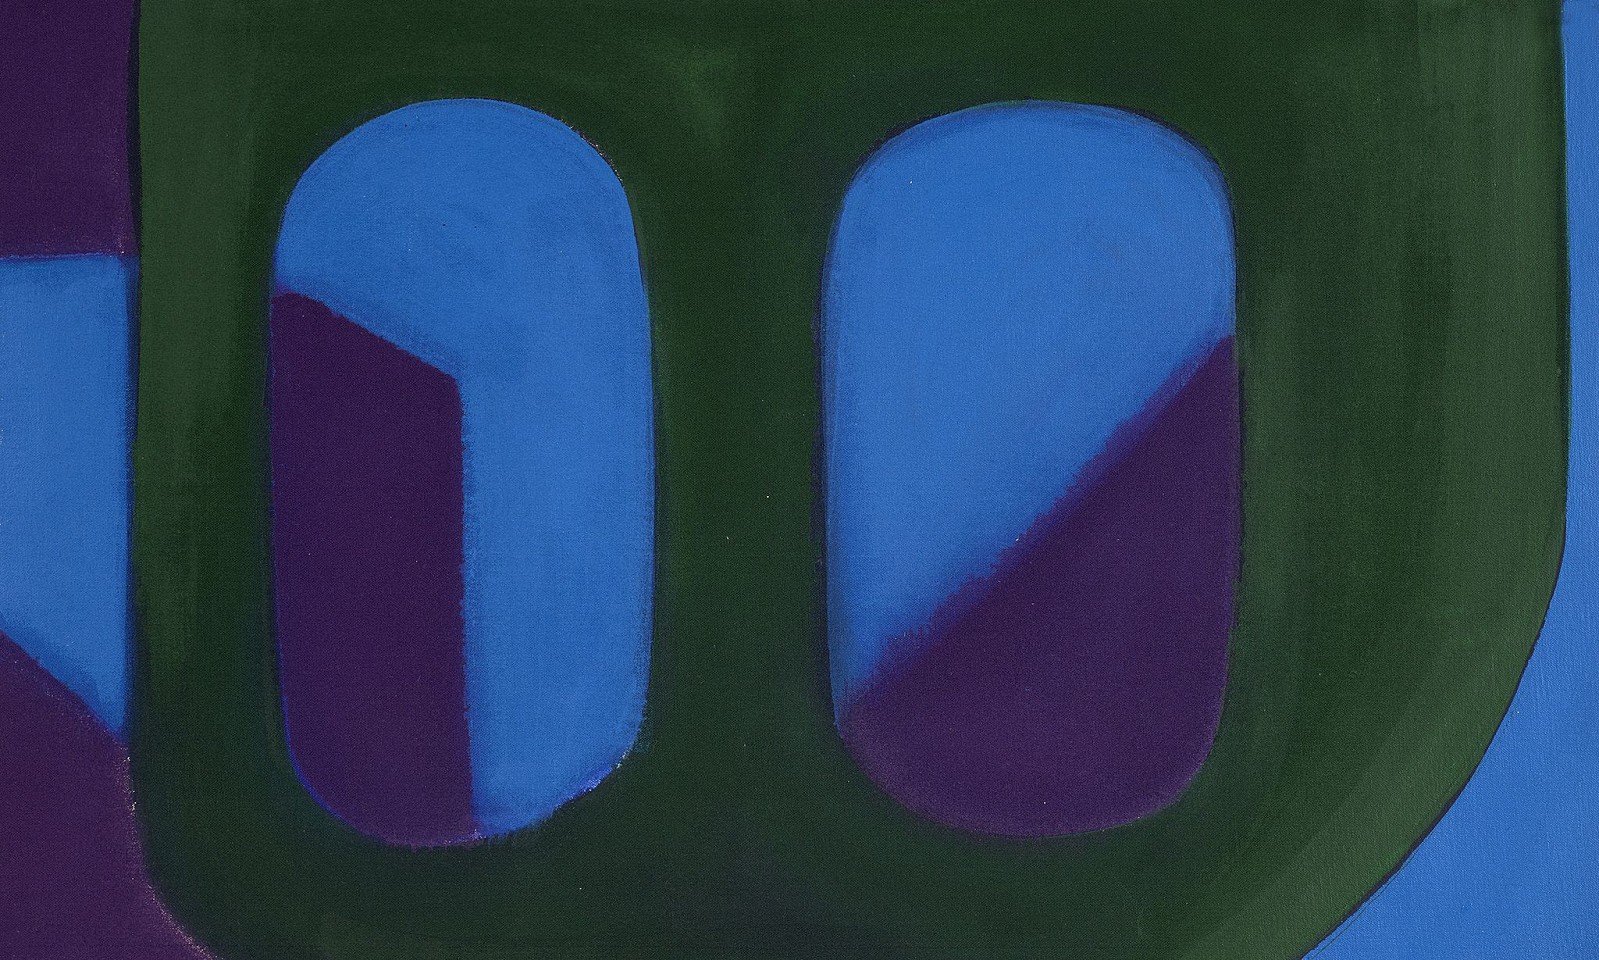 Yvonne Thomas, Untitled | SOLD, 1973
Acrylic on canvas, 17 7/8 x 29 1/4 in. (45.4 x 74.3 cm)
THO-00165